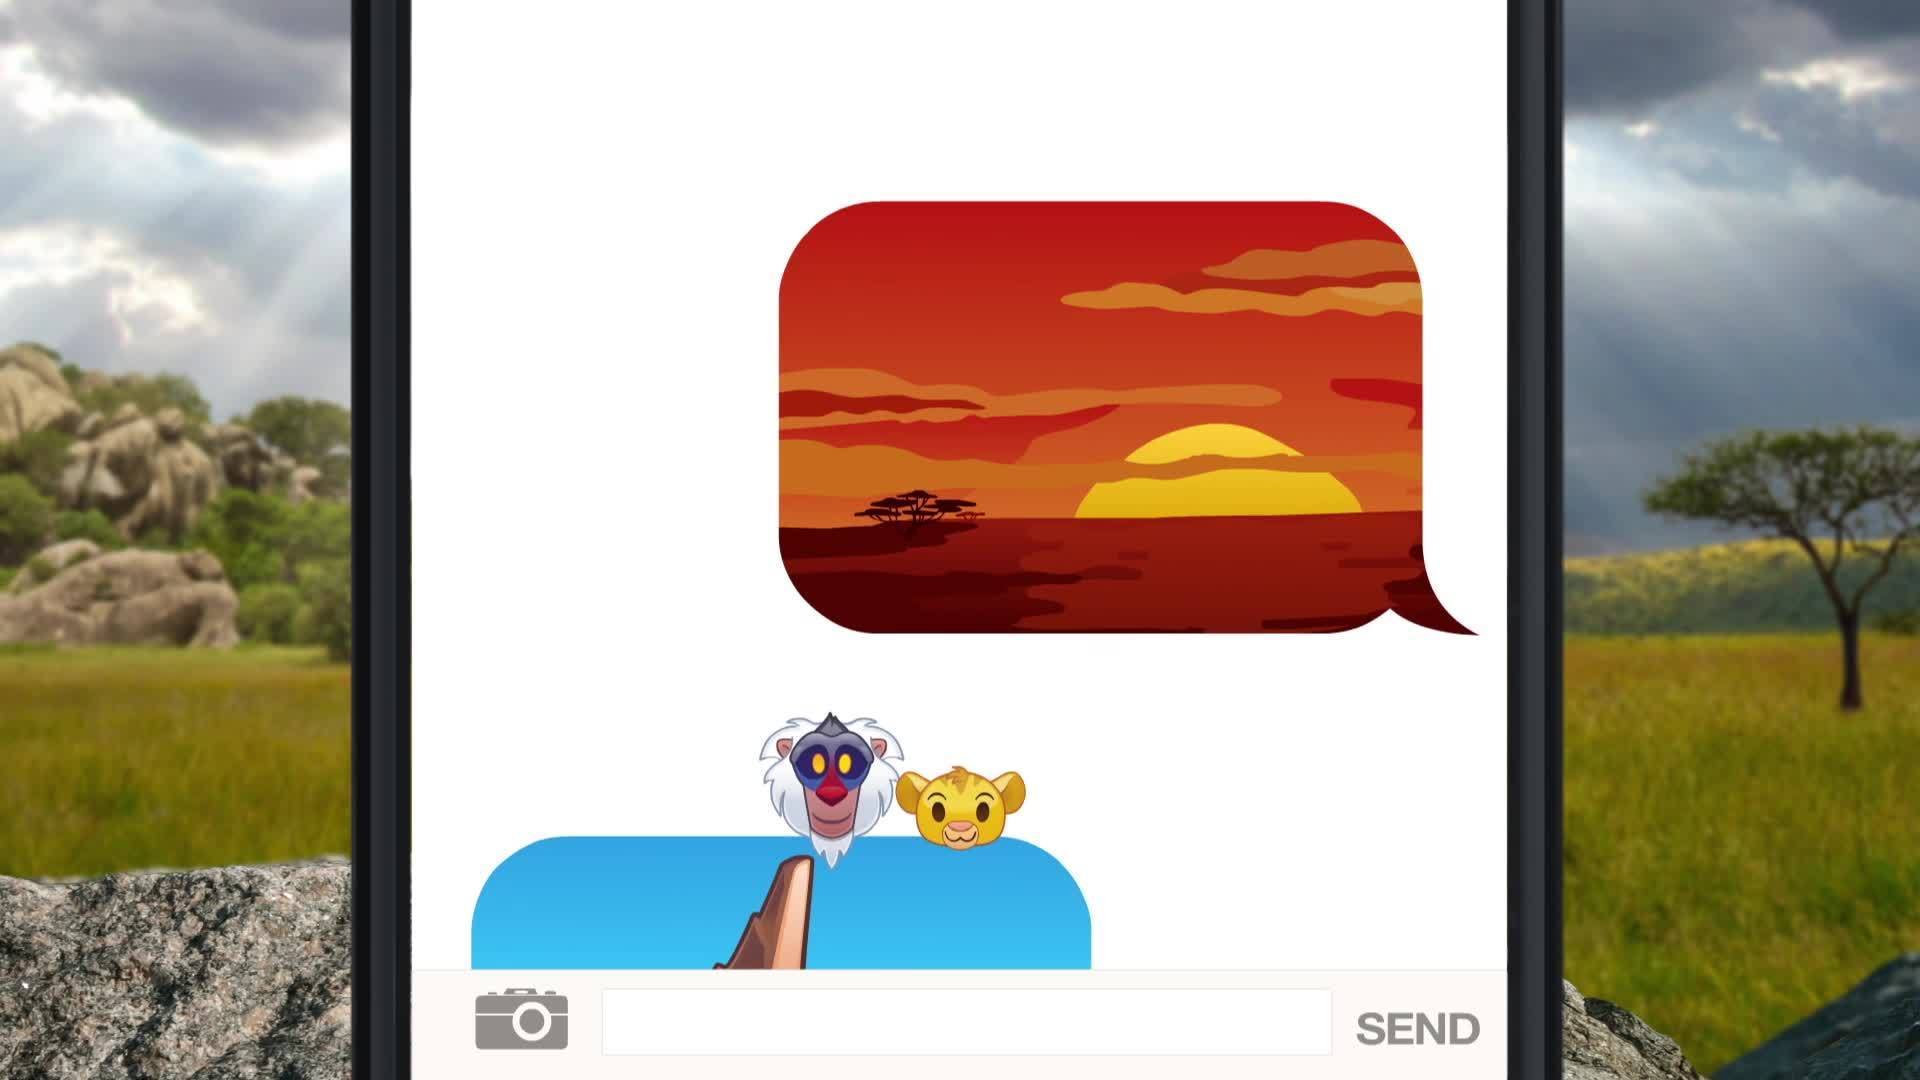 The Lion King As Told By Emoji